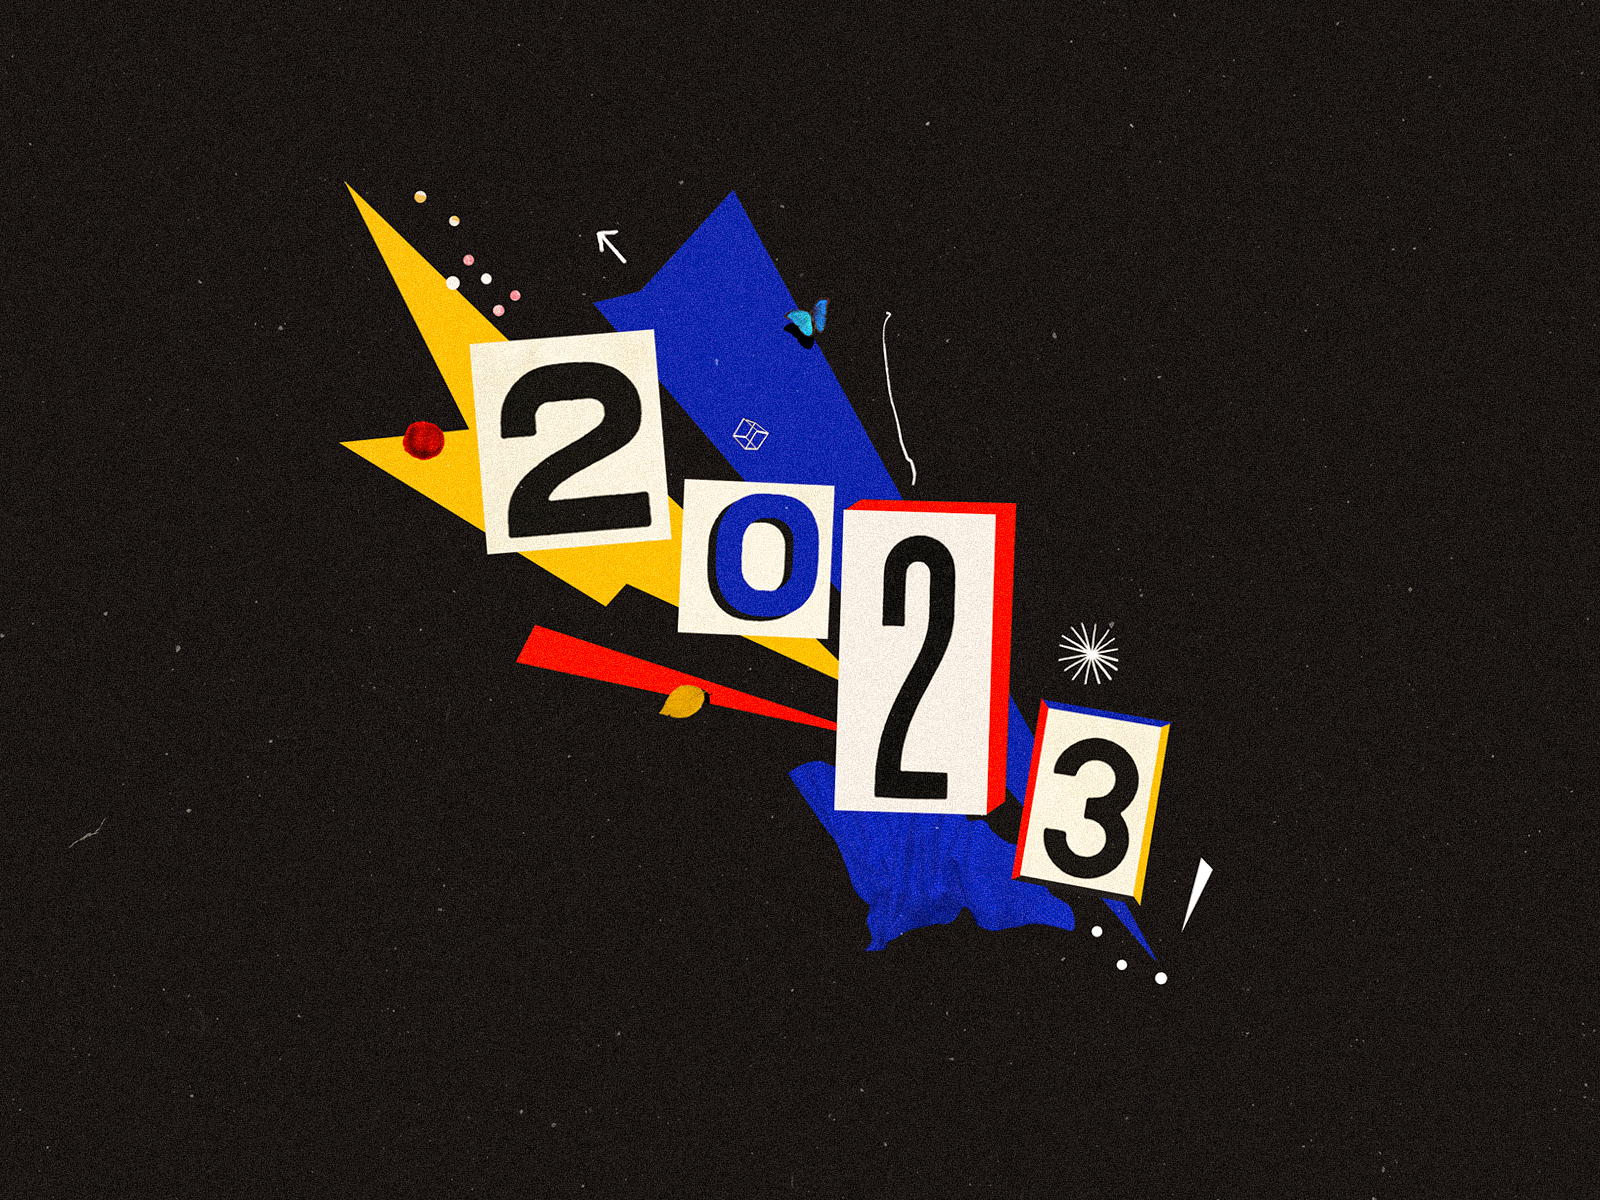 2023! 2023 collage collage art collage digital collage maker collageart colorful design graphic graphicdesign happy illustration new year nye